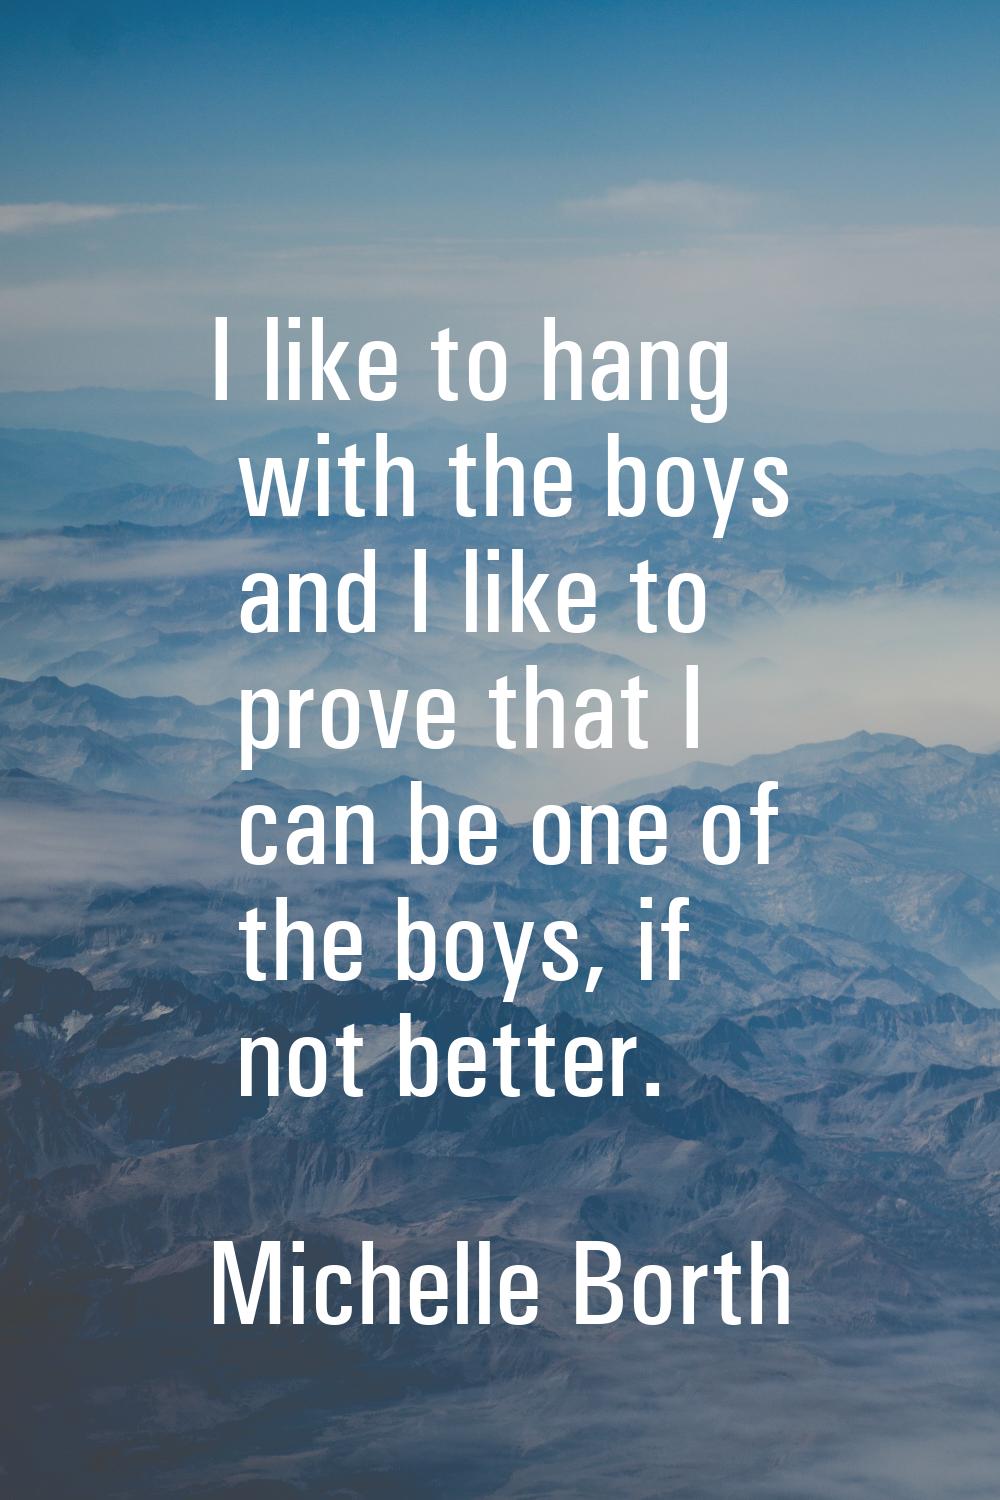 I like to hang with the boys and I like to prove that I can be one of the boys, if not better.